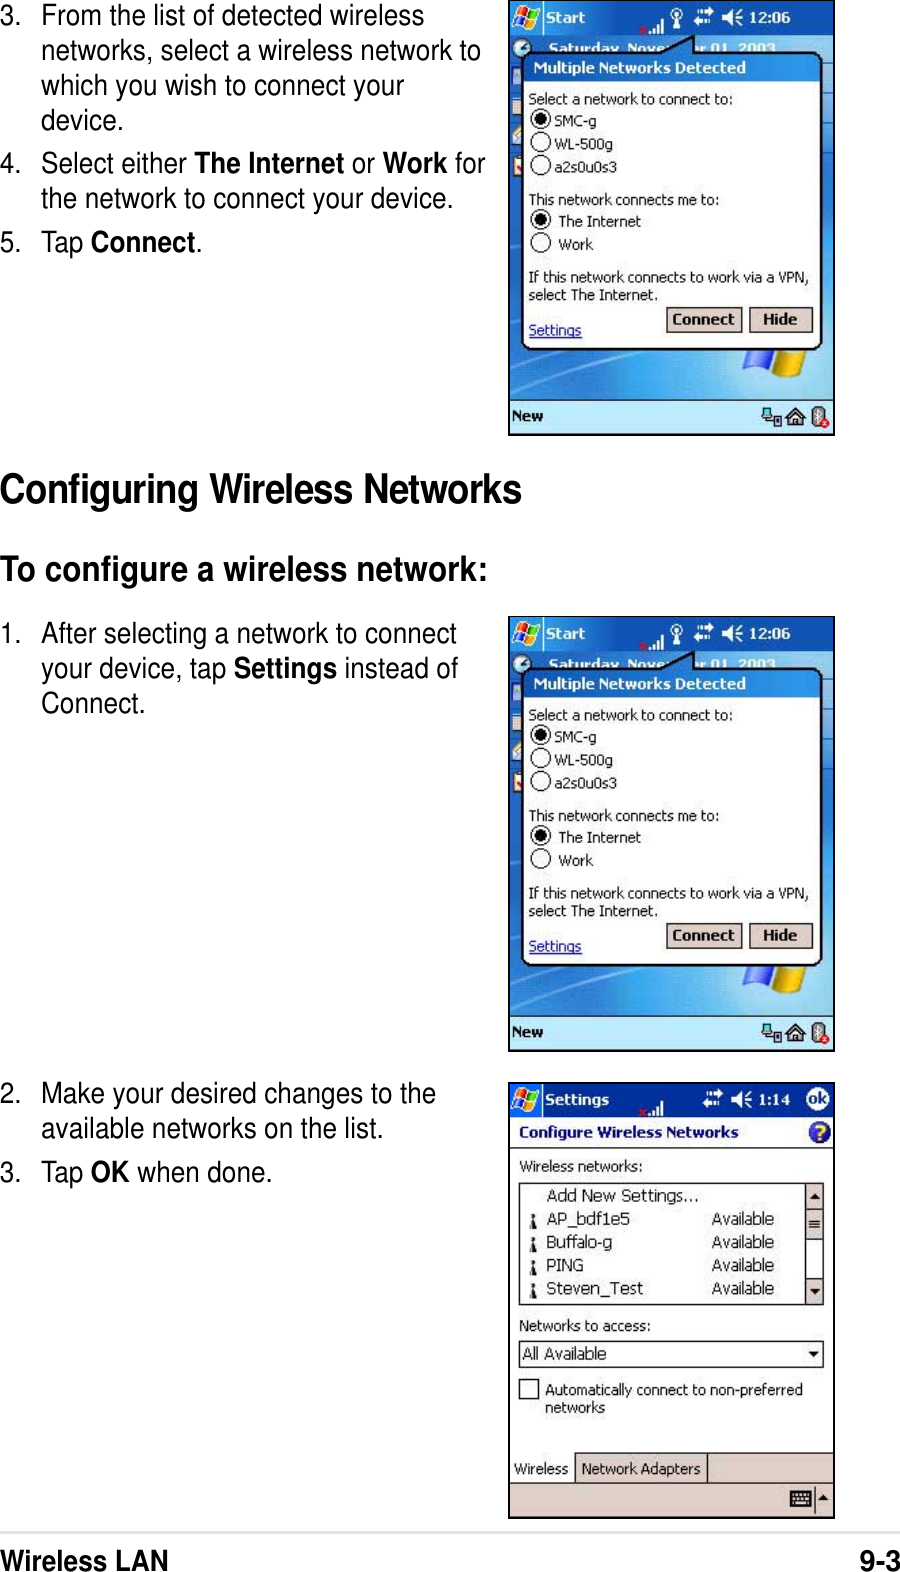 Wireless LAN9-33. From the list of detected wirelessnetworks, select a wireless network towhich you wish to connect yourdevice.4. Select either The Internet or Work forthe network to connect your device.5. Tap Connect.Configuring Wireless NetworksTo configure a wireless network:1. After selecting a network to connectyour device, tap Settings instead ofConnect.2. Make your desired changes to theavailable networks on the list.3. Tap OK when done.